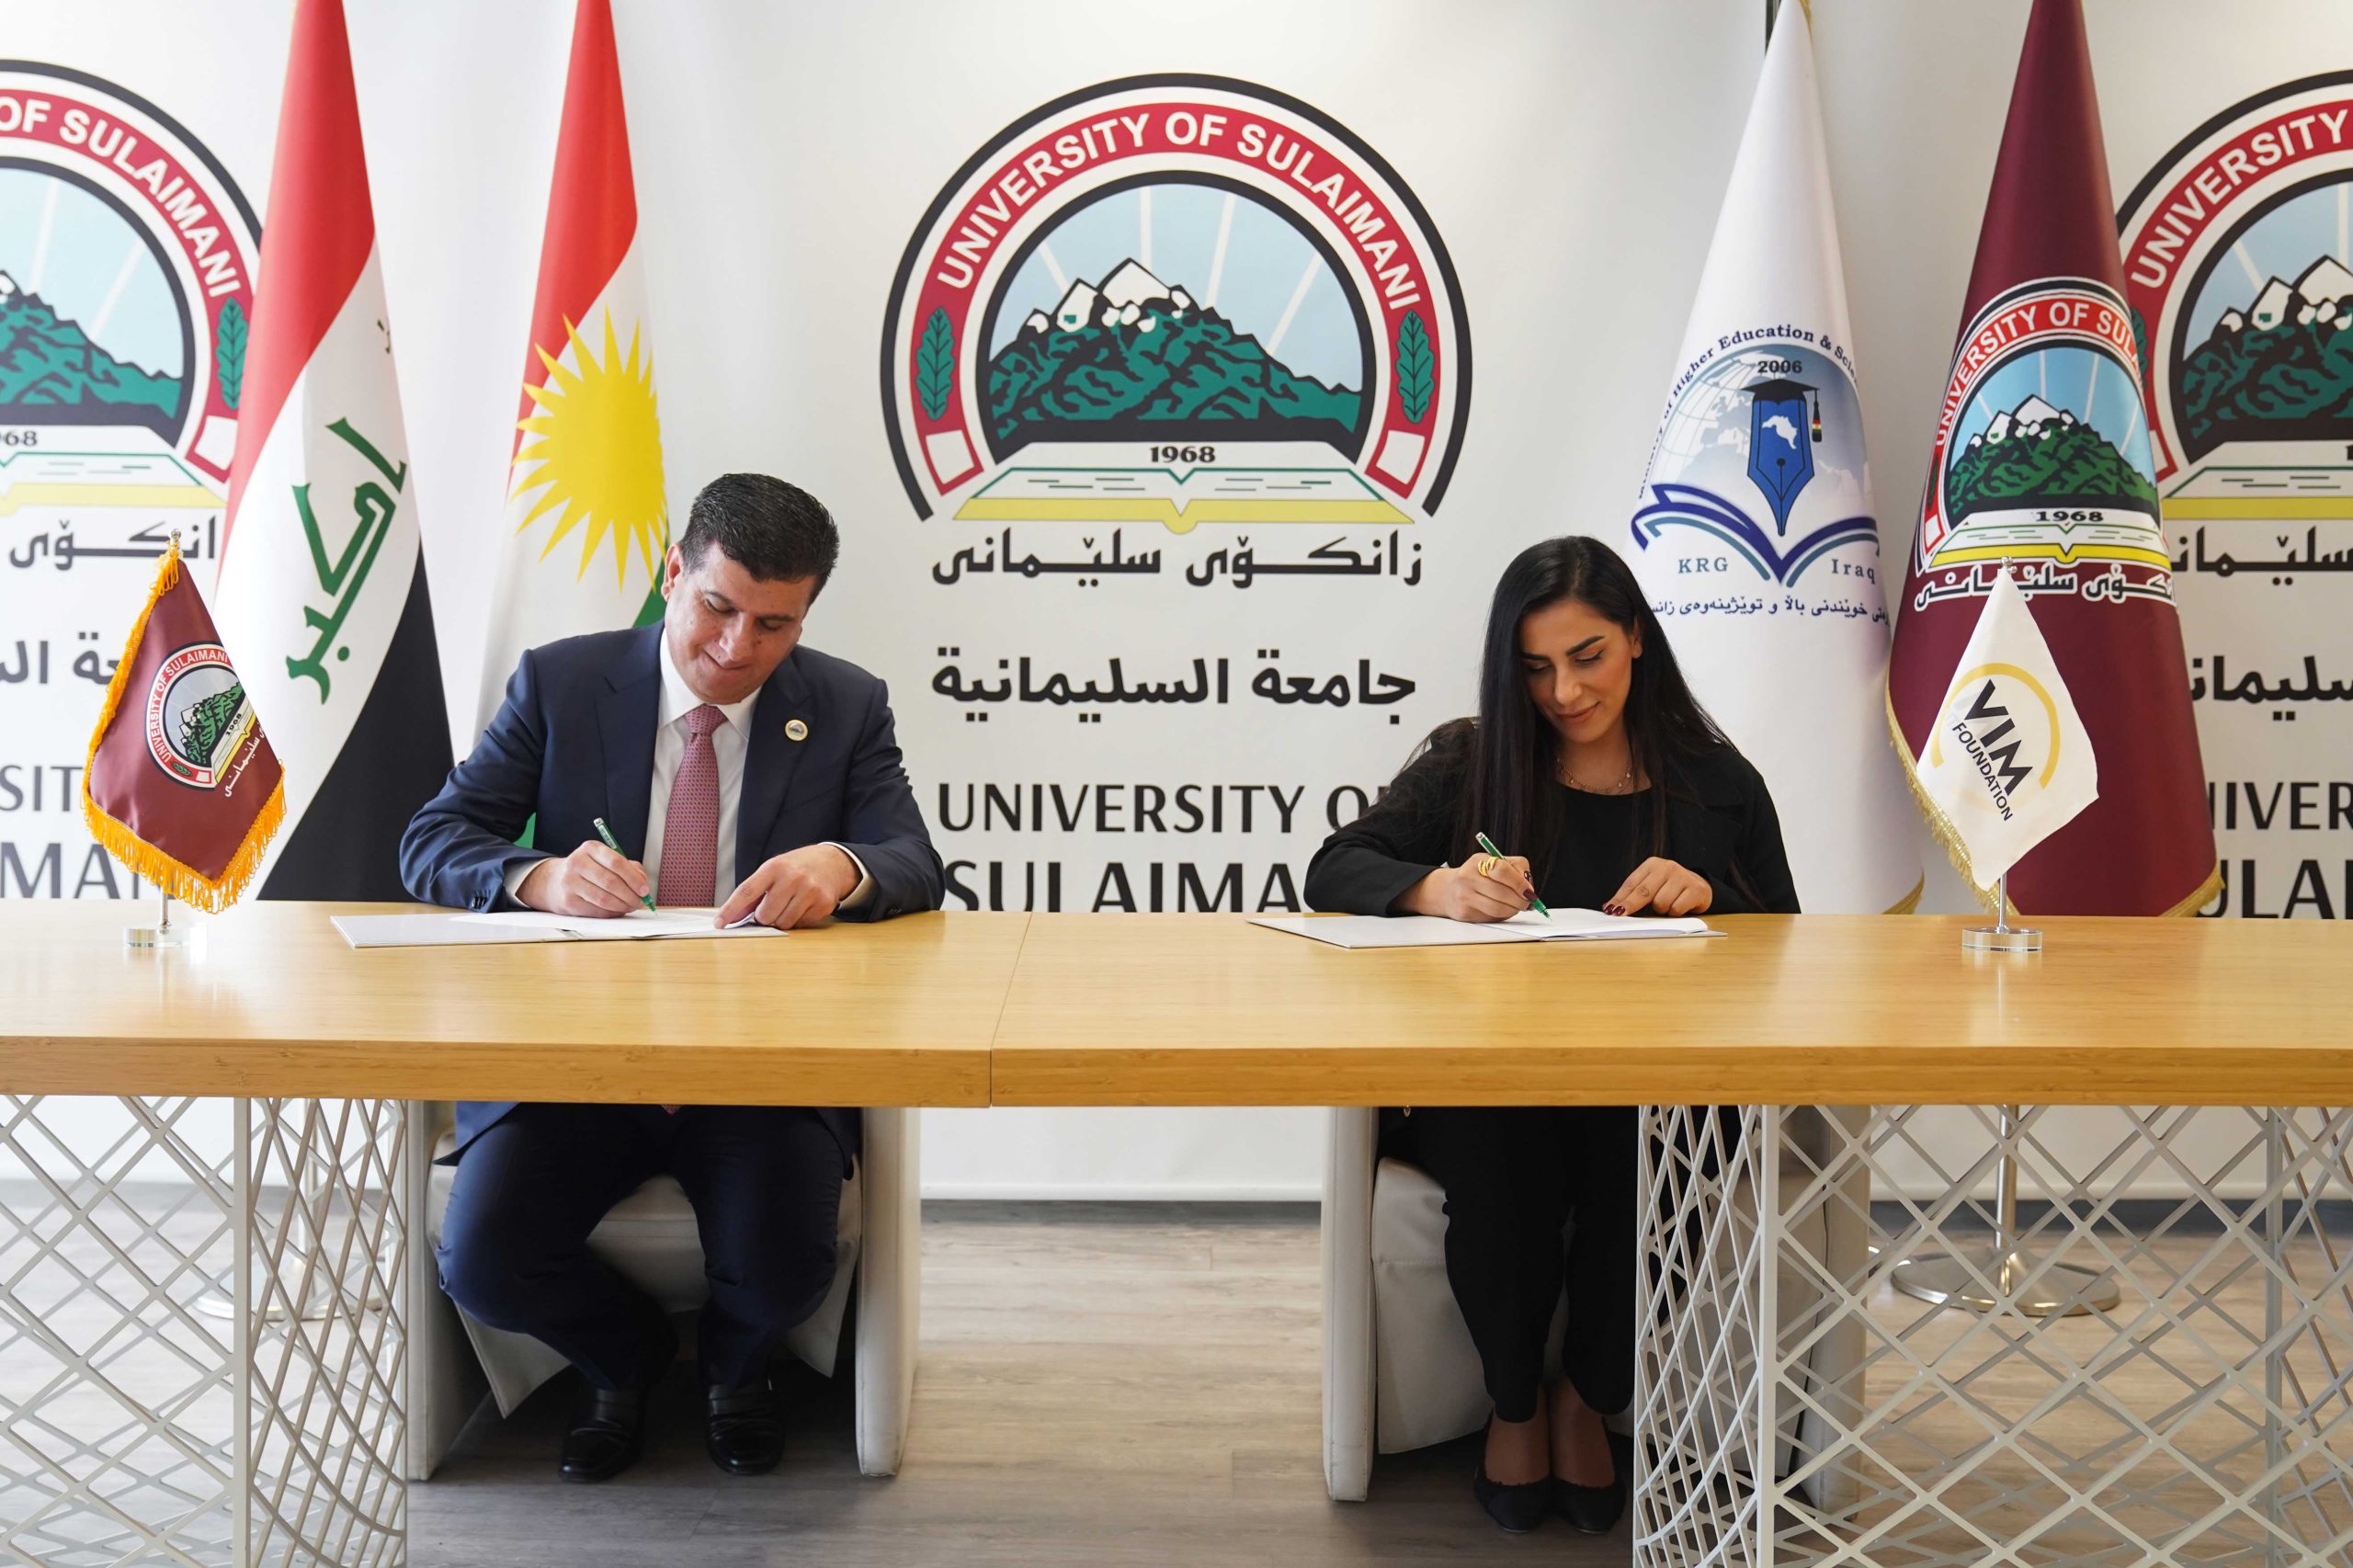 Vim Foundation and the University of Sulaimani have signed a Memorandum of Understanding agreement.